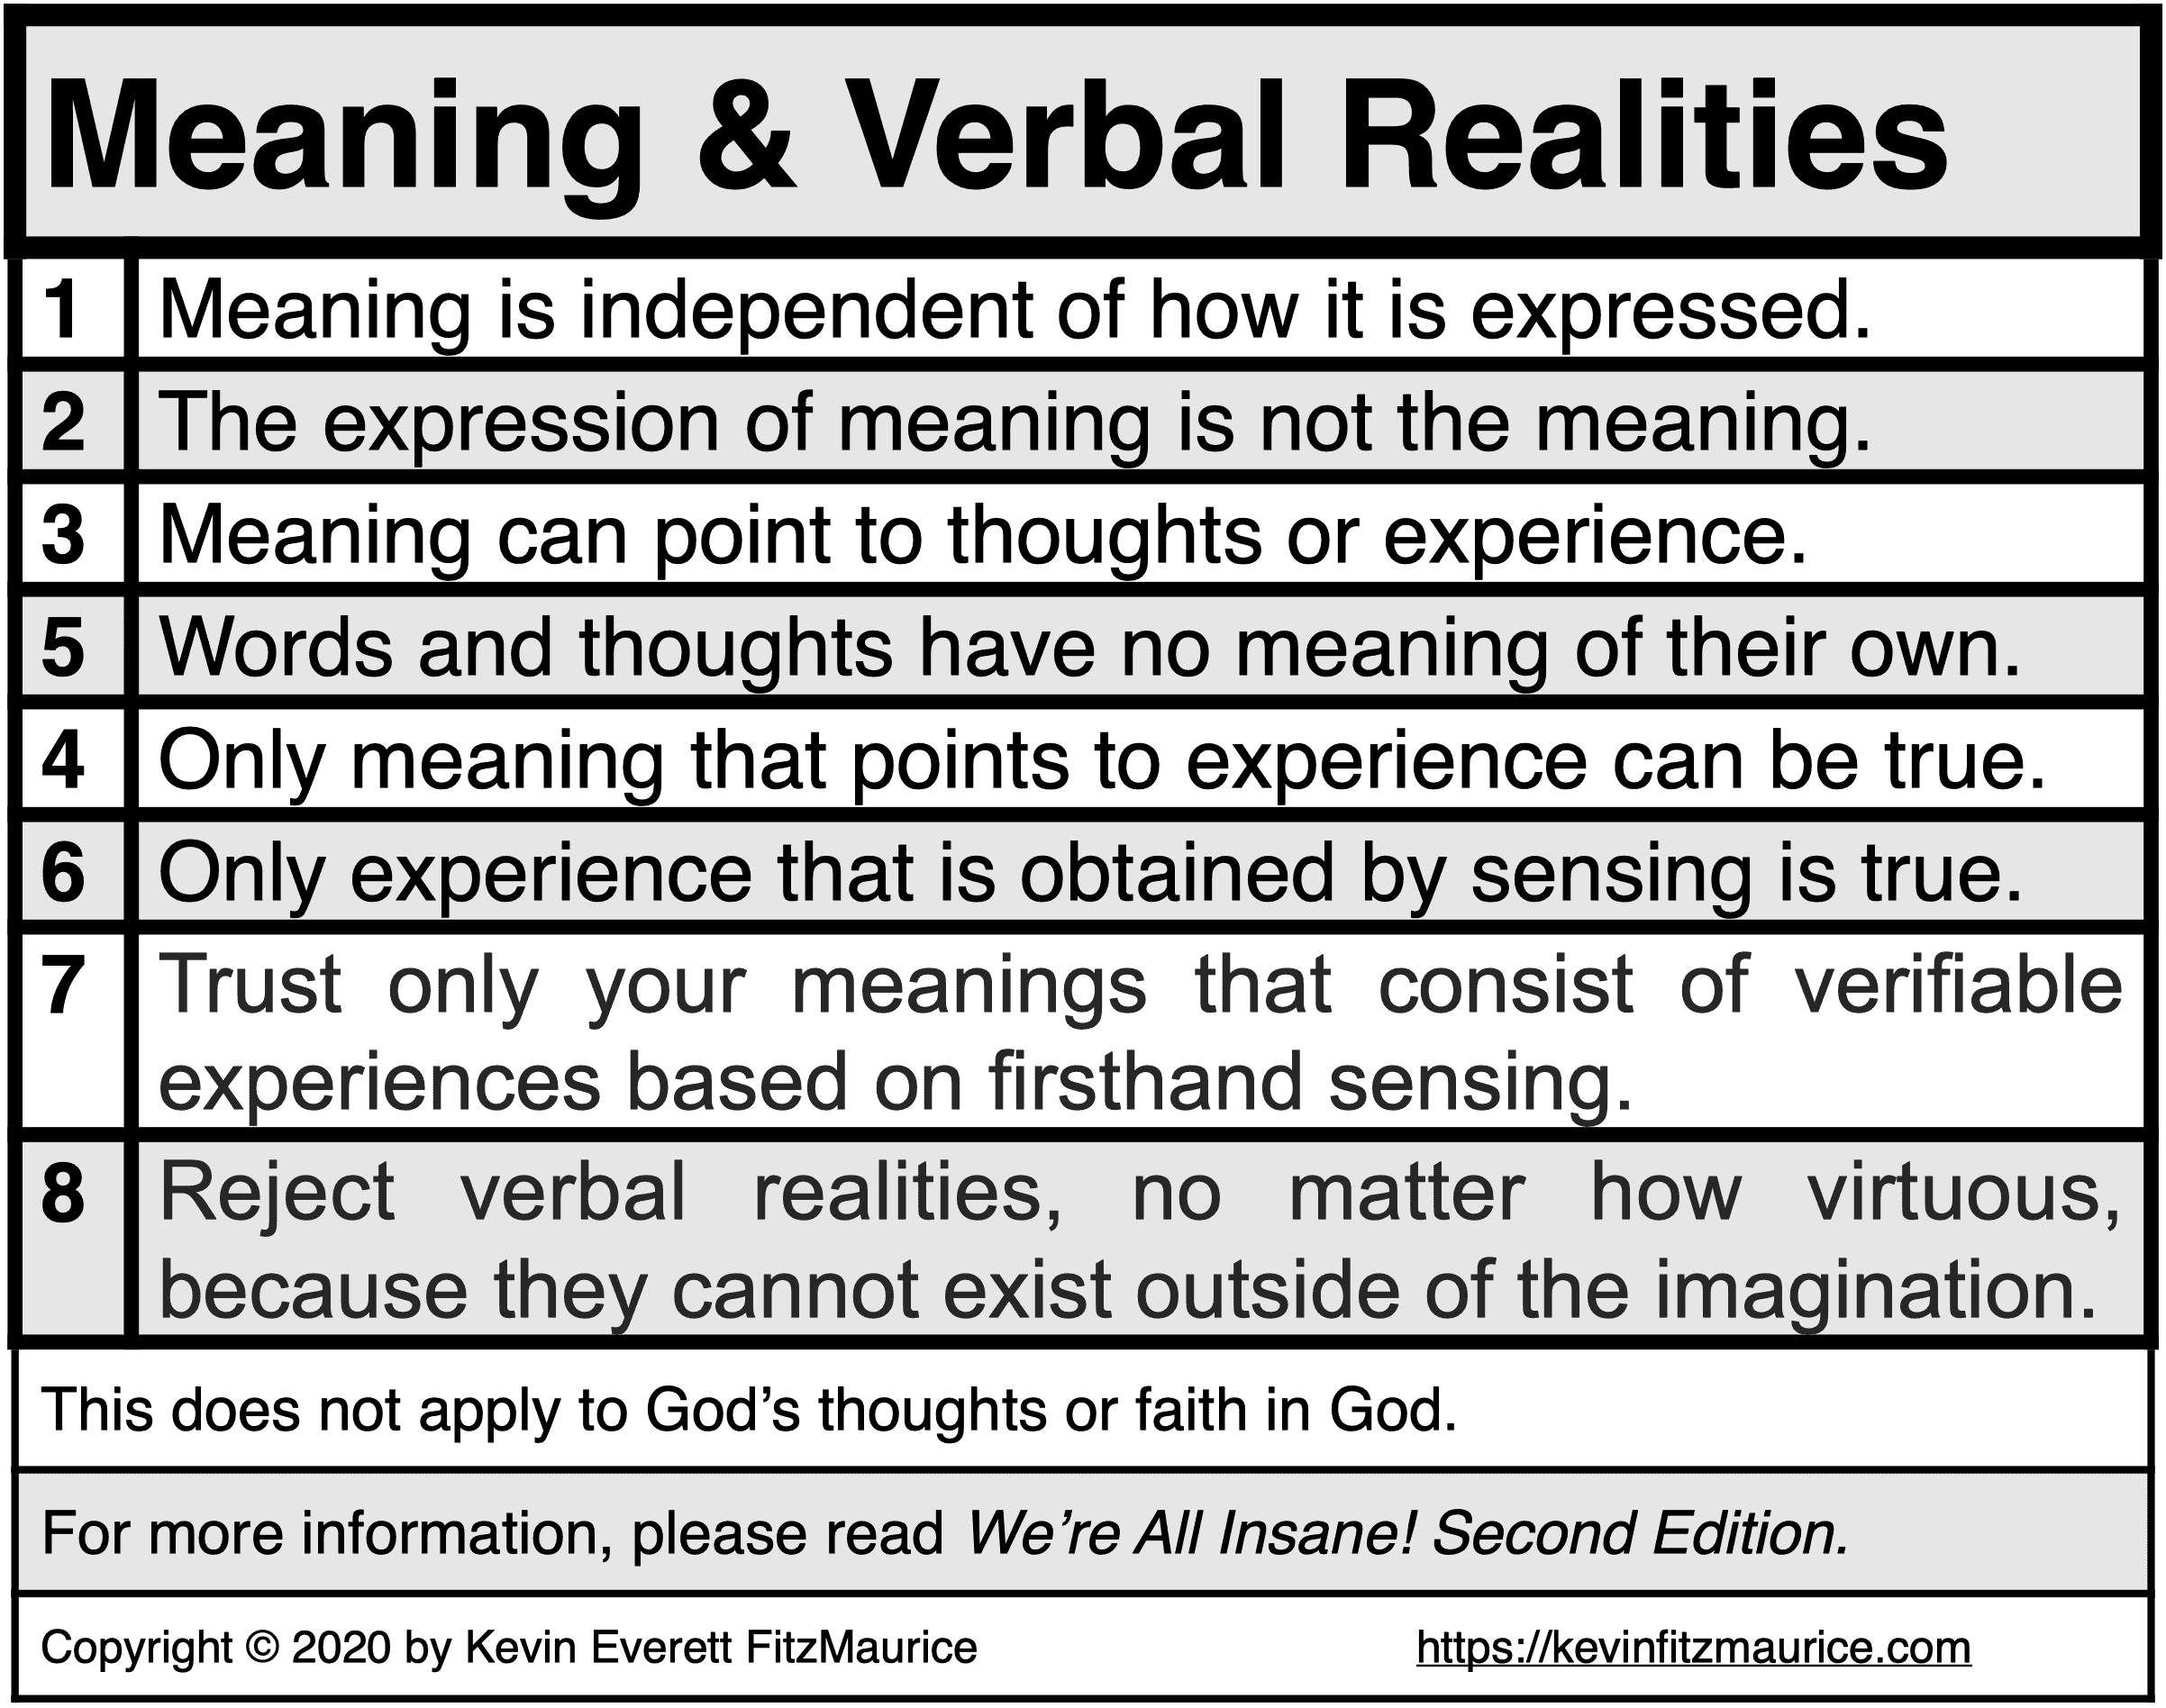 Meaning, words, and verbal realities.